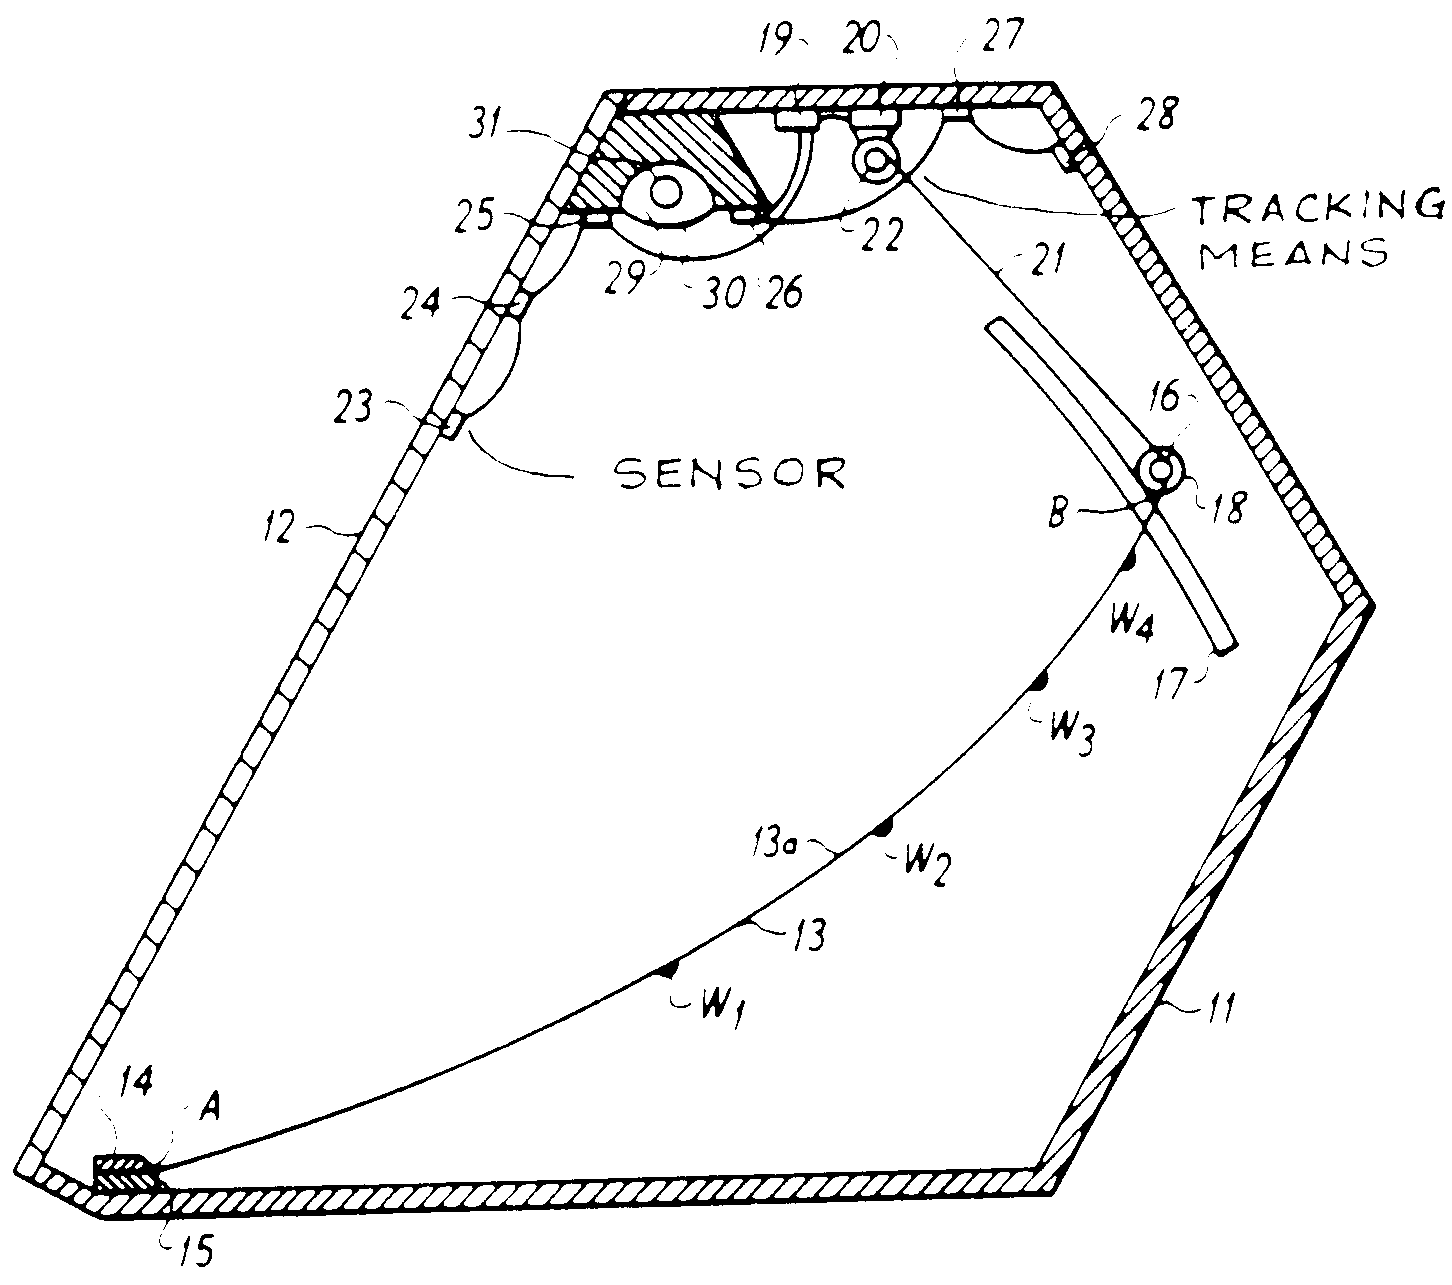 A focusing solar collector which utilizes an elongated parabolicshaped mirror made from a sheet of drapable material so that whendraped in a catenary-like curved configuration, the sun"srays may be focused on a linear target which is axially alignedwith the axis of the mirror.  Means are provided for adjusting theangle of the drape of the catenary-like curve in order to maintainthe focus of the sun"s rays on the linear target as therelative diurnal positions of the sun to the collector changes. The optimum catenary like curve for the range of the drape anglesinvolved is achieved by using a nonlinear distribution of weightalong the cross-section of the draped mirror material.
